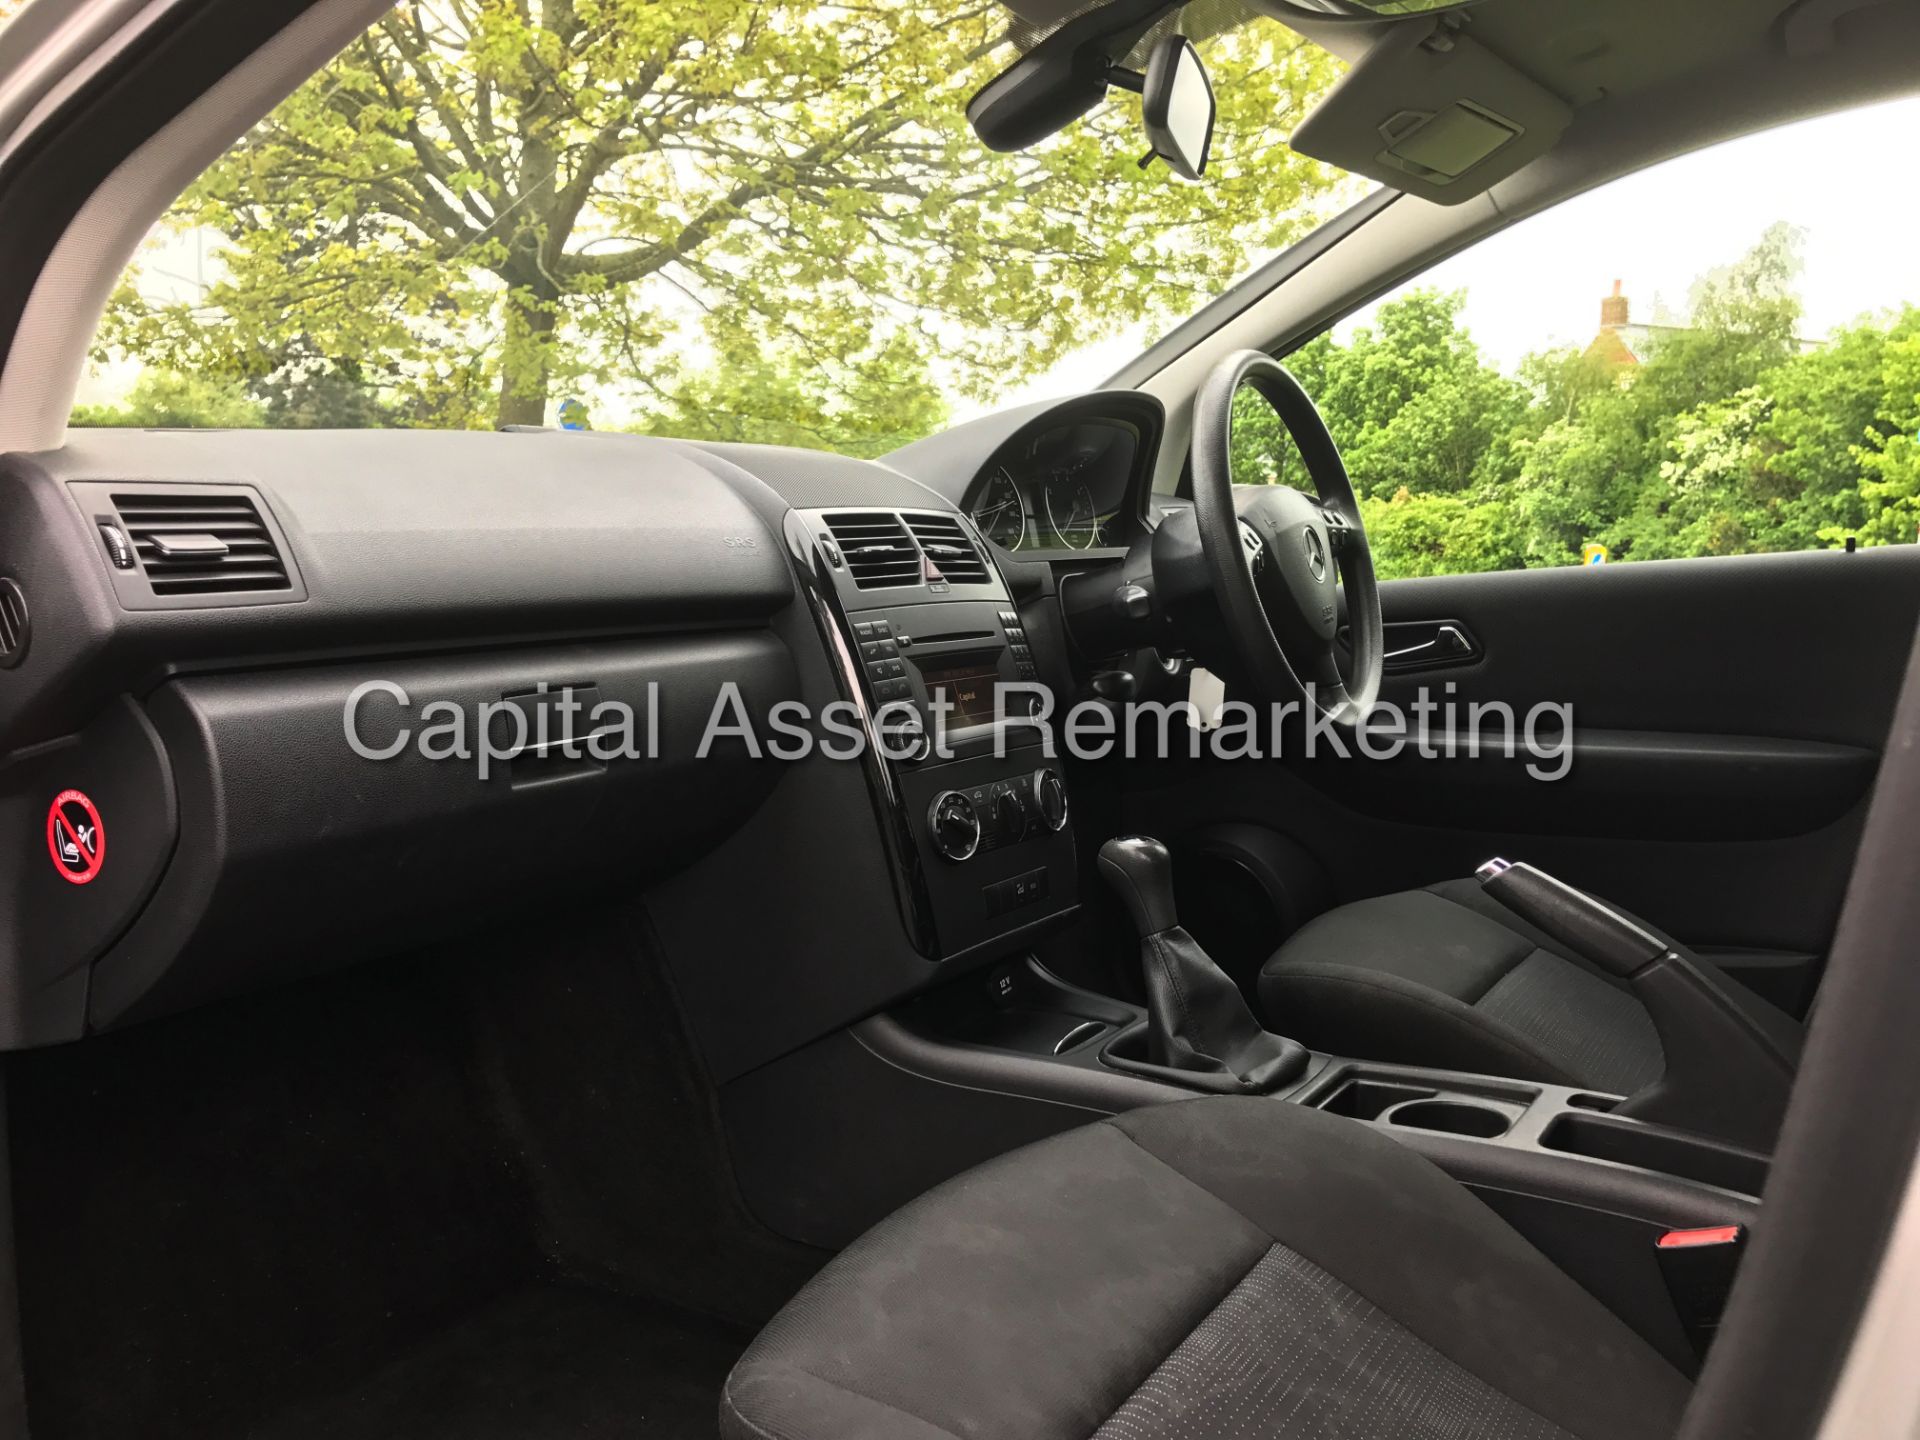 MERCEDES-BENZ A160 BLUEEFFICIENCY 'SE EDITION' (2011 MODEL) **LOW MILES** (55 MPG +) - Image 14 of 21